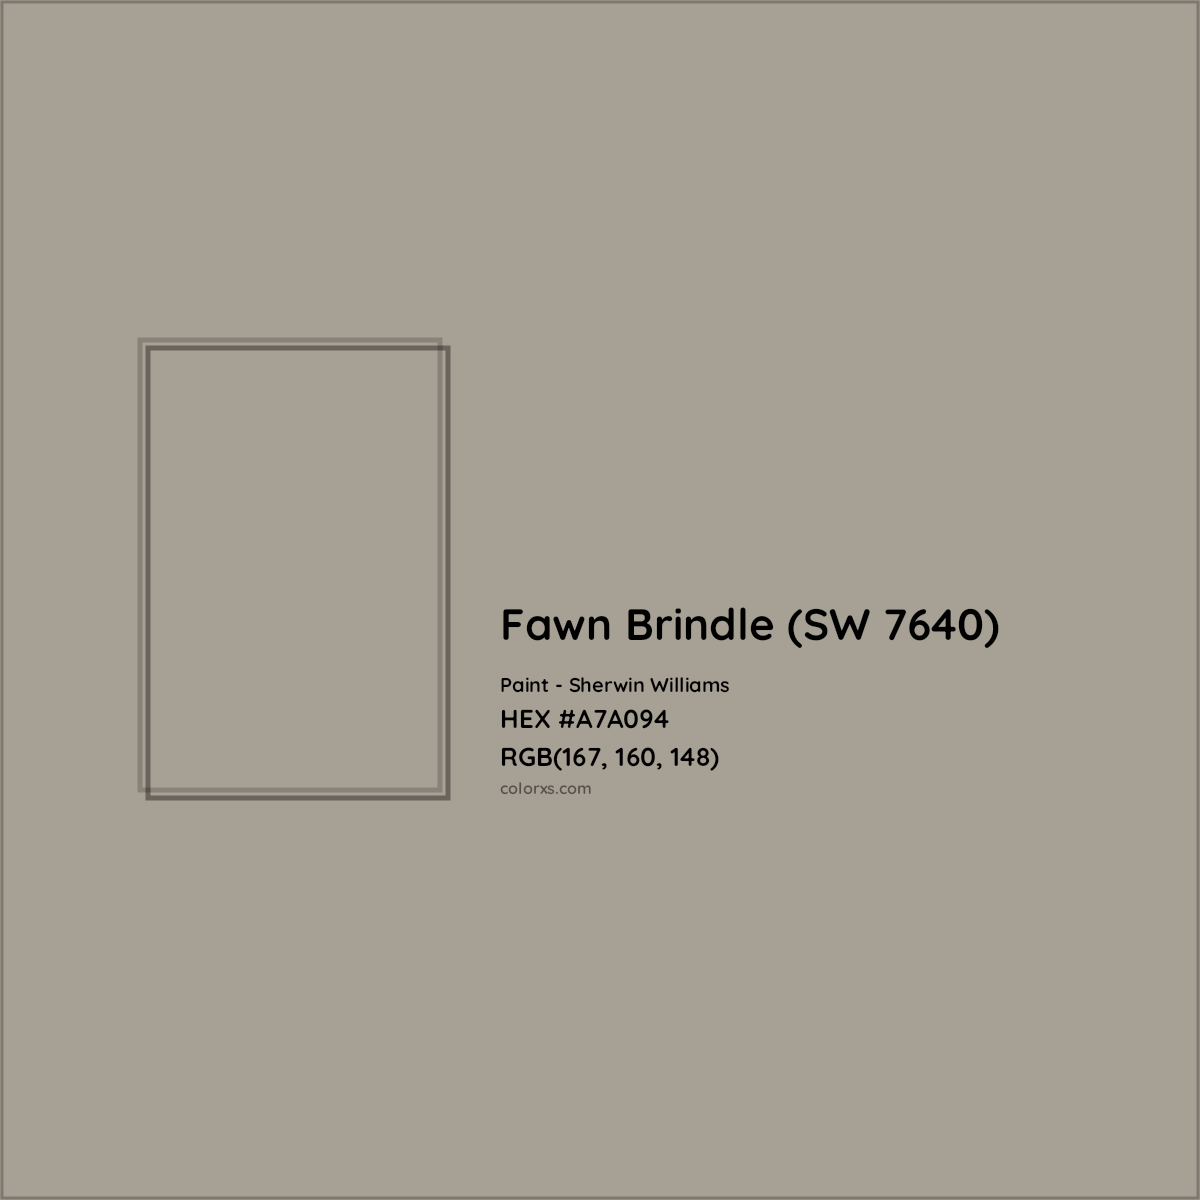 HEX #A7A094 Fawn Brindle (SW 7640) Paint Sherwin Williams - Color Code